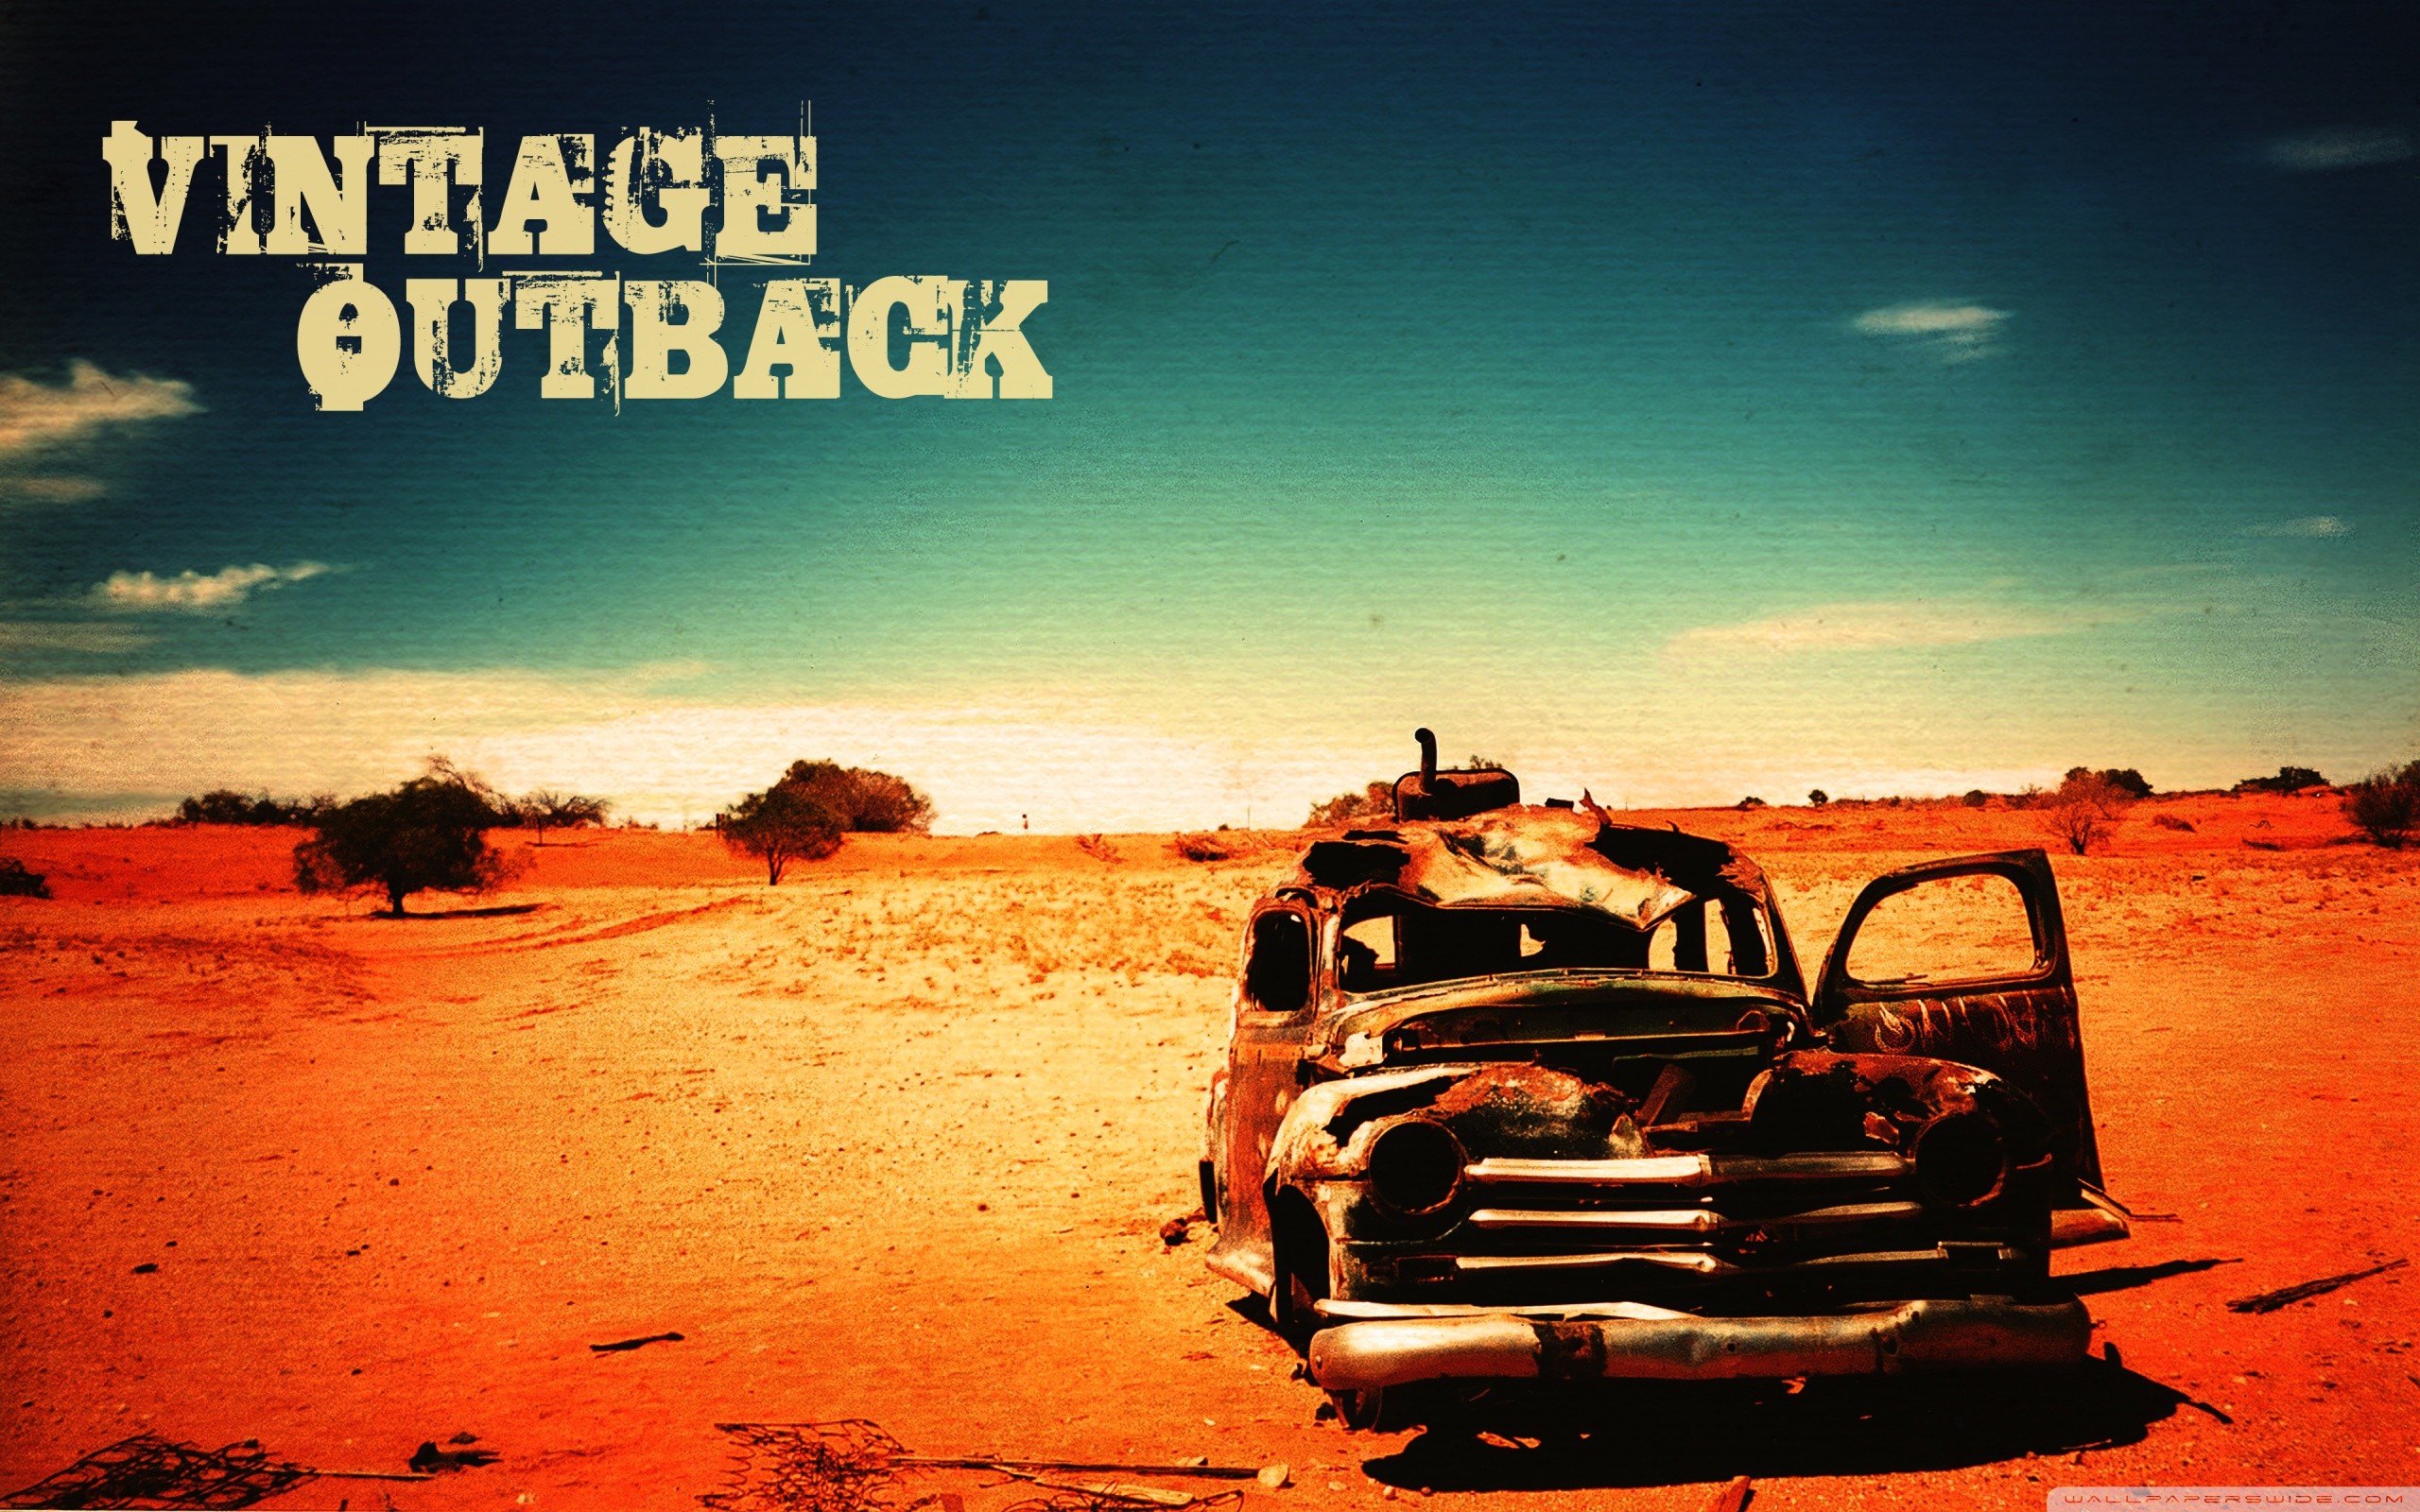 The Vintage Outback Wallpaper iPhone